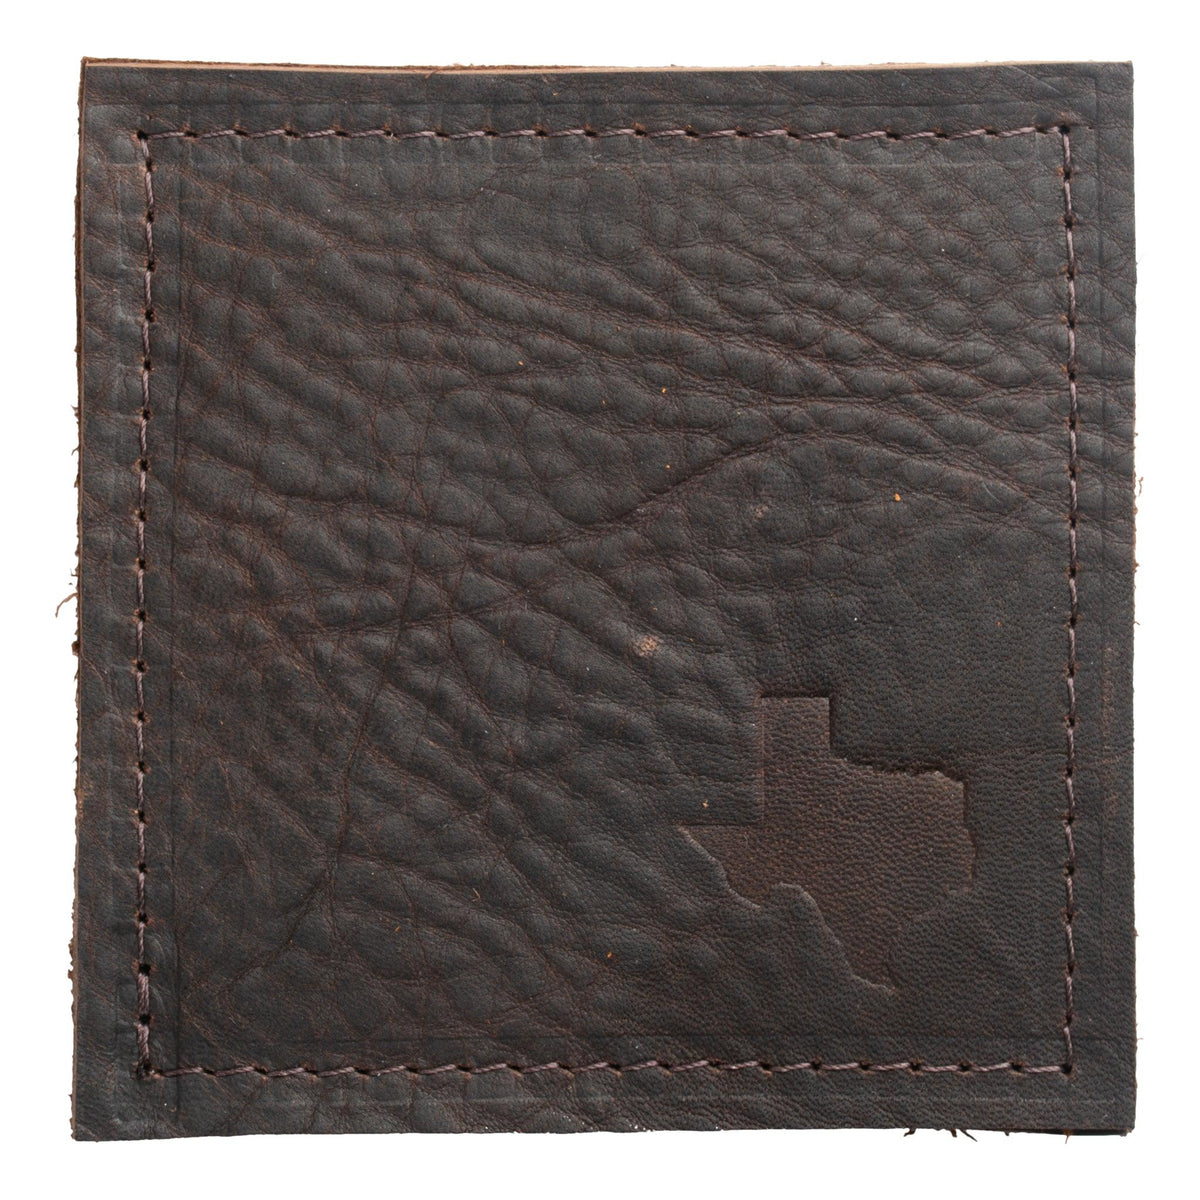 Texas (State of) Leather Coaster (Set of 4) - GLORY HAUS 